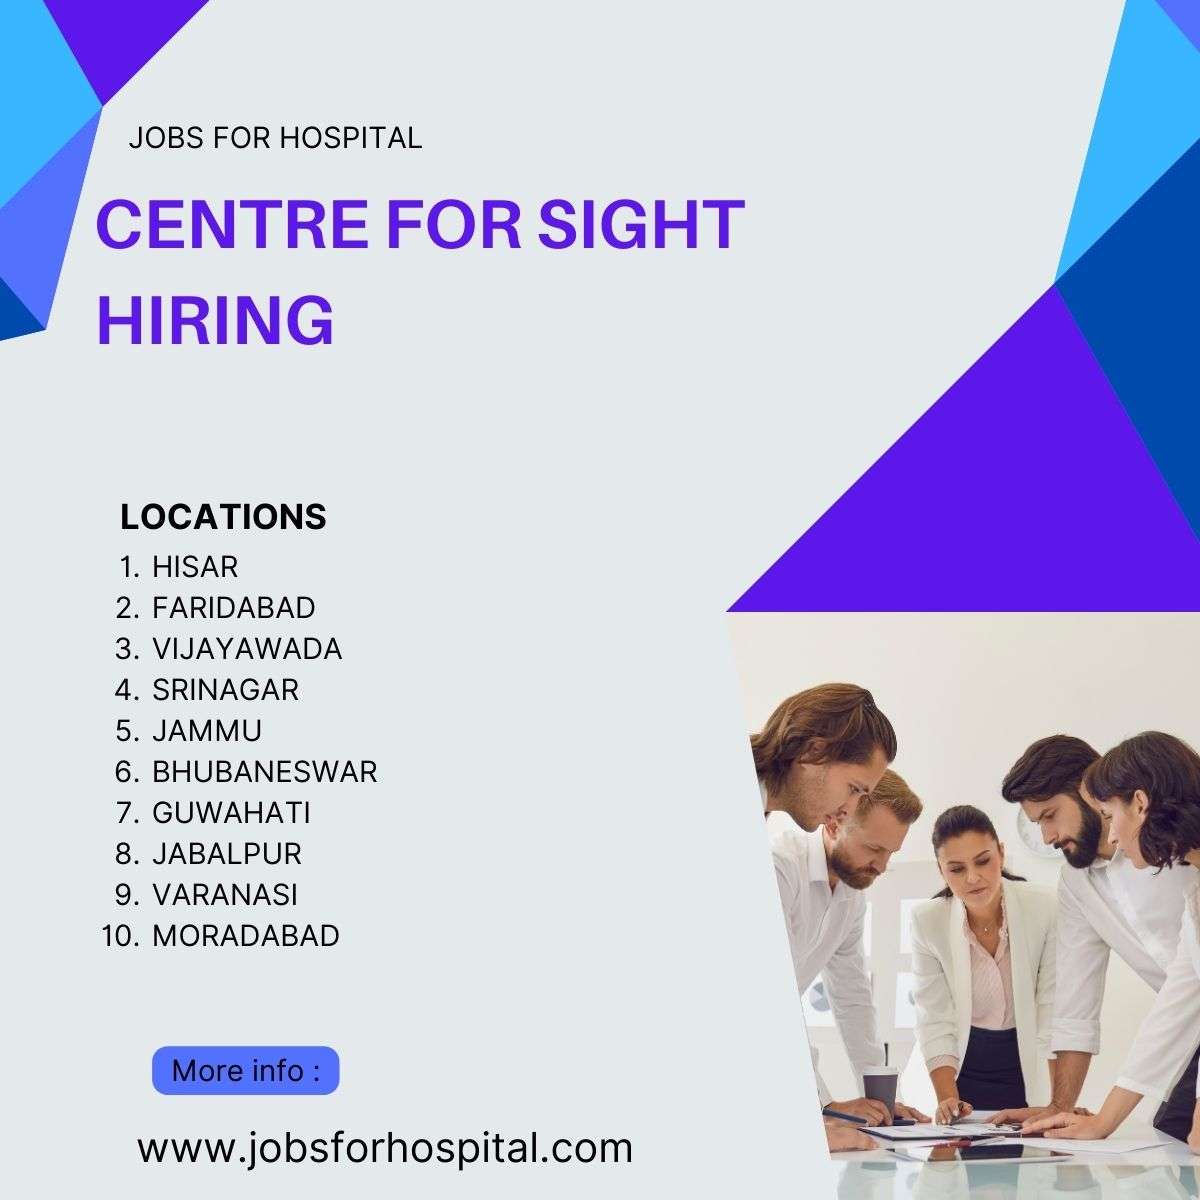 CENTRE FOR SIGHT HIRING